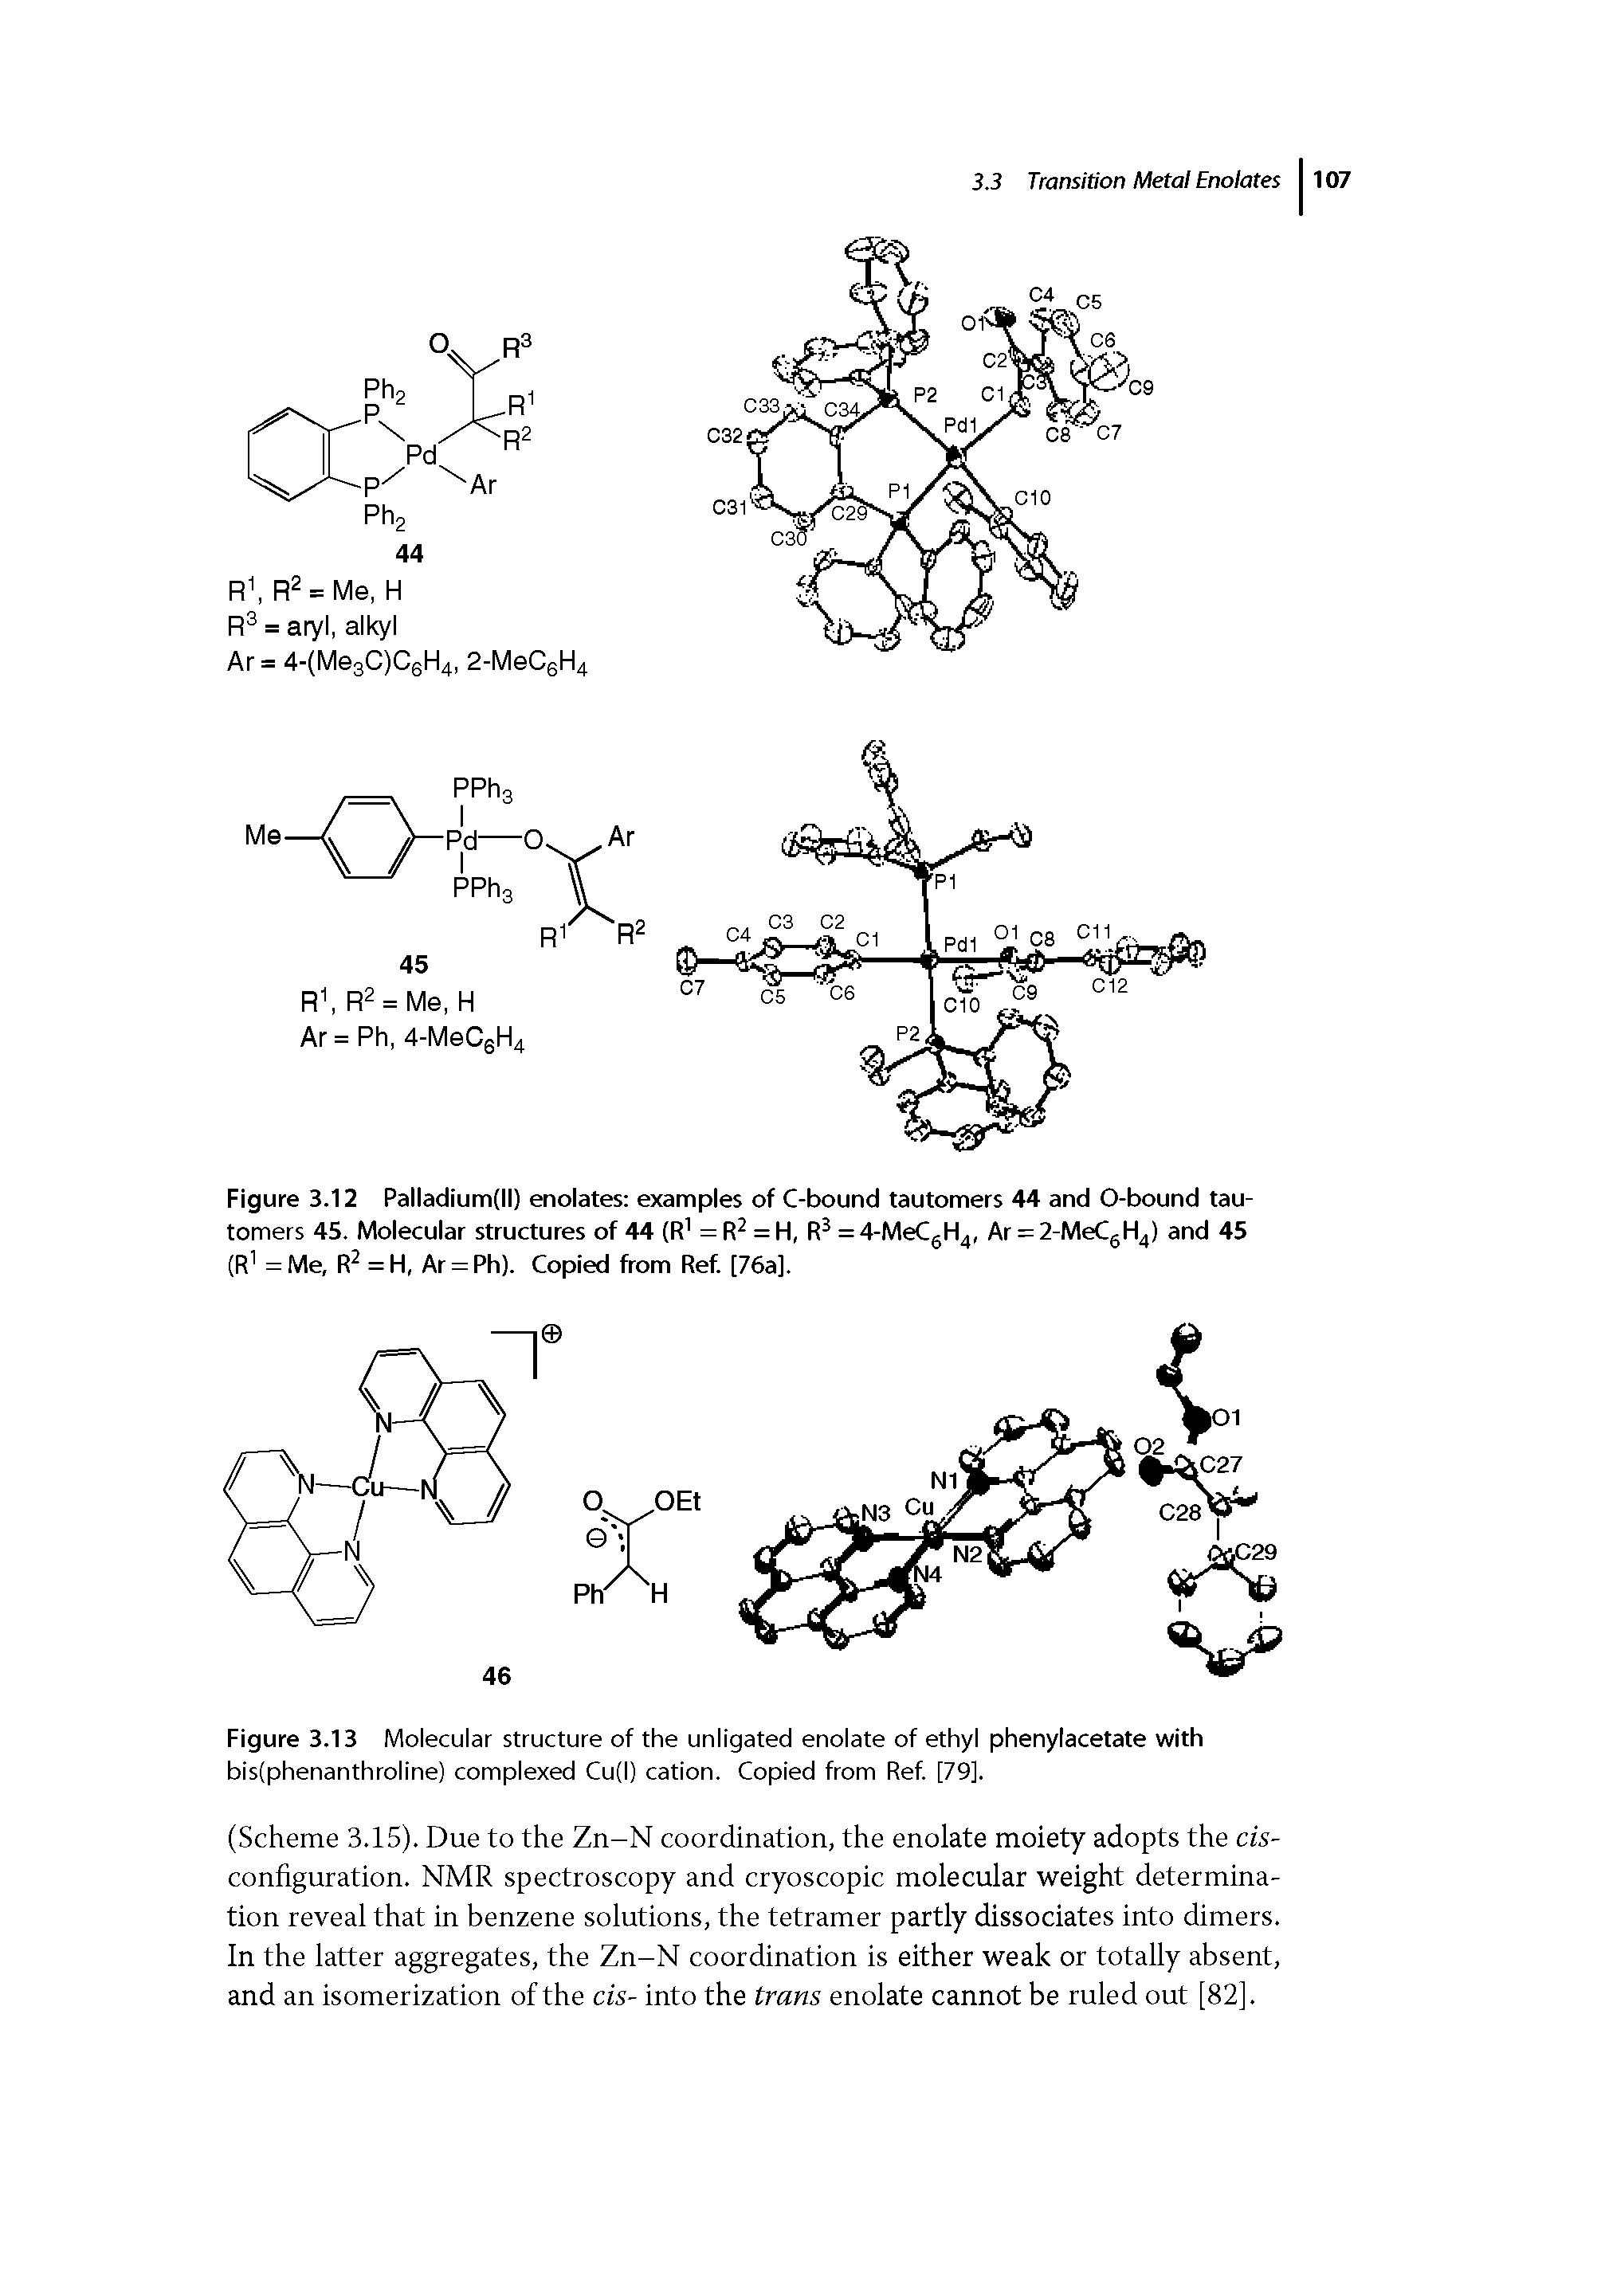 Figure 3.12 Palladium(ll) enolates examples of C-bound tautomers 44 and 0-bound tautomers 45. Molecular structures of 44 (R =r2 = h, R =4-MeCgl-l4, Ar = 2-MeCgH4) and 45 (R = Me, R = H, Ar = Ph). Copied from Ref [76a].